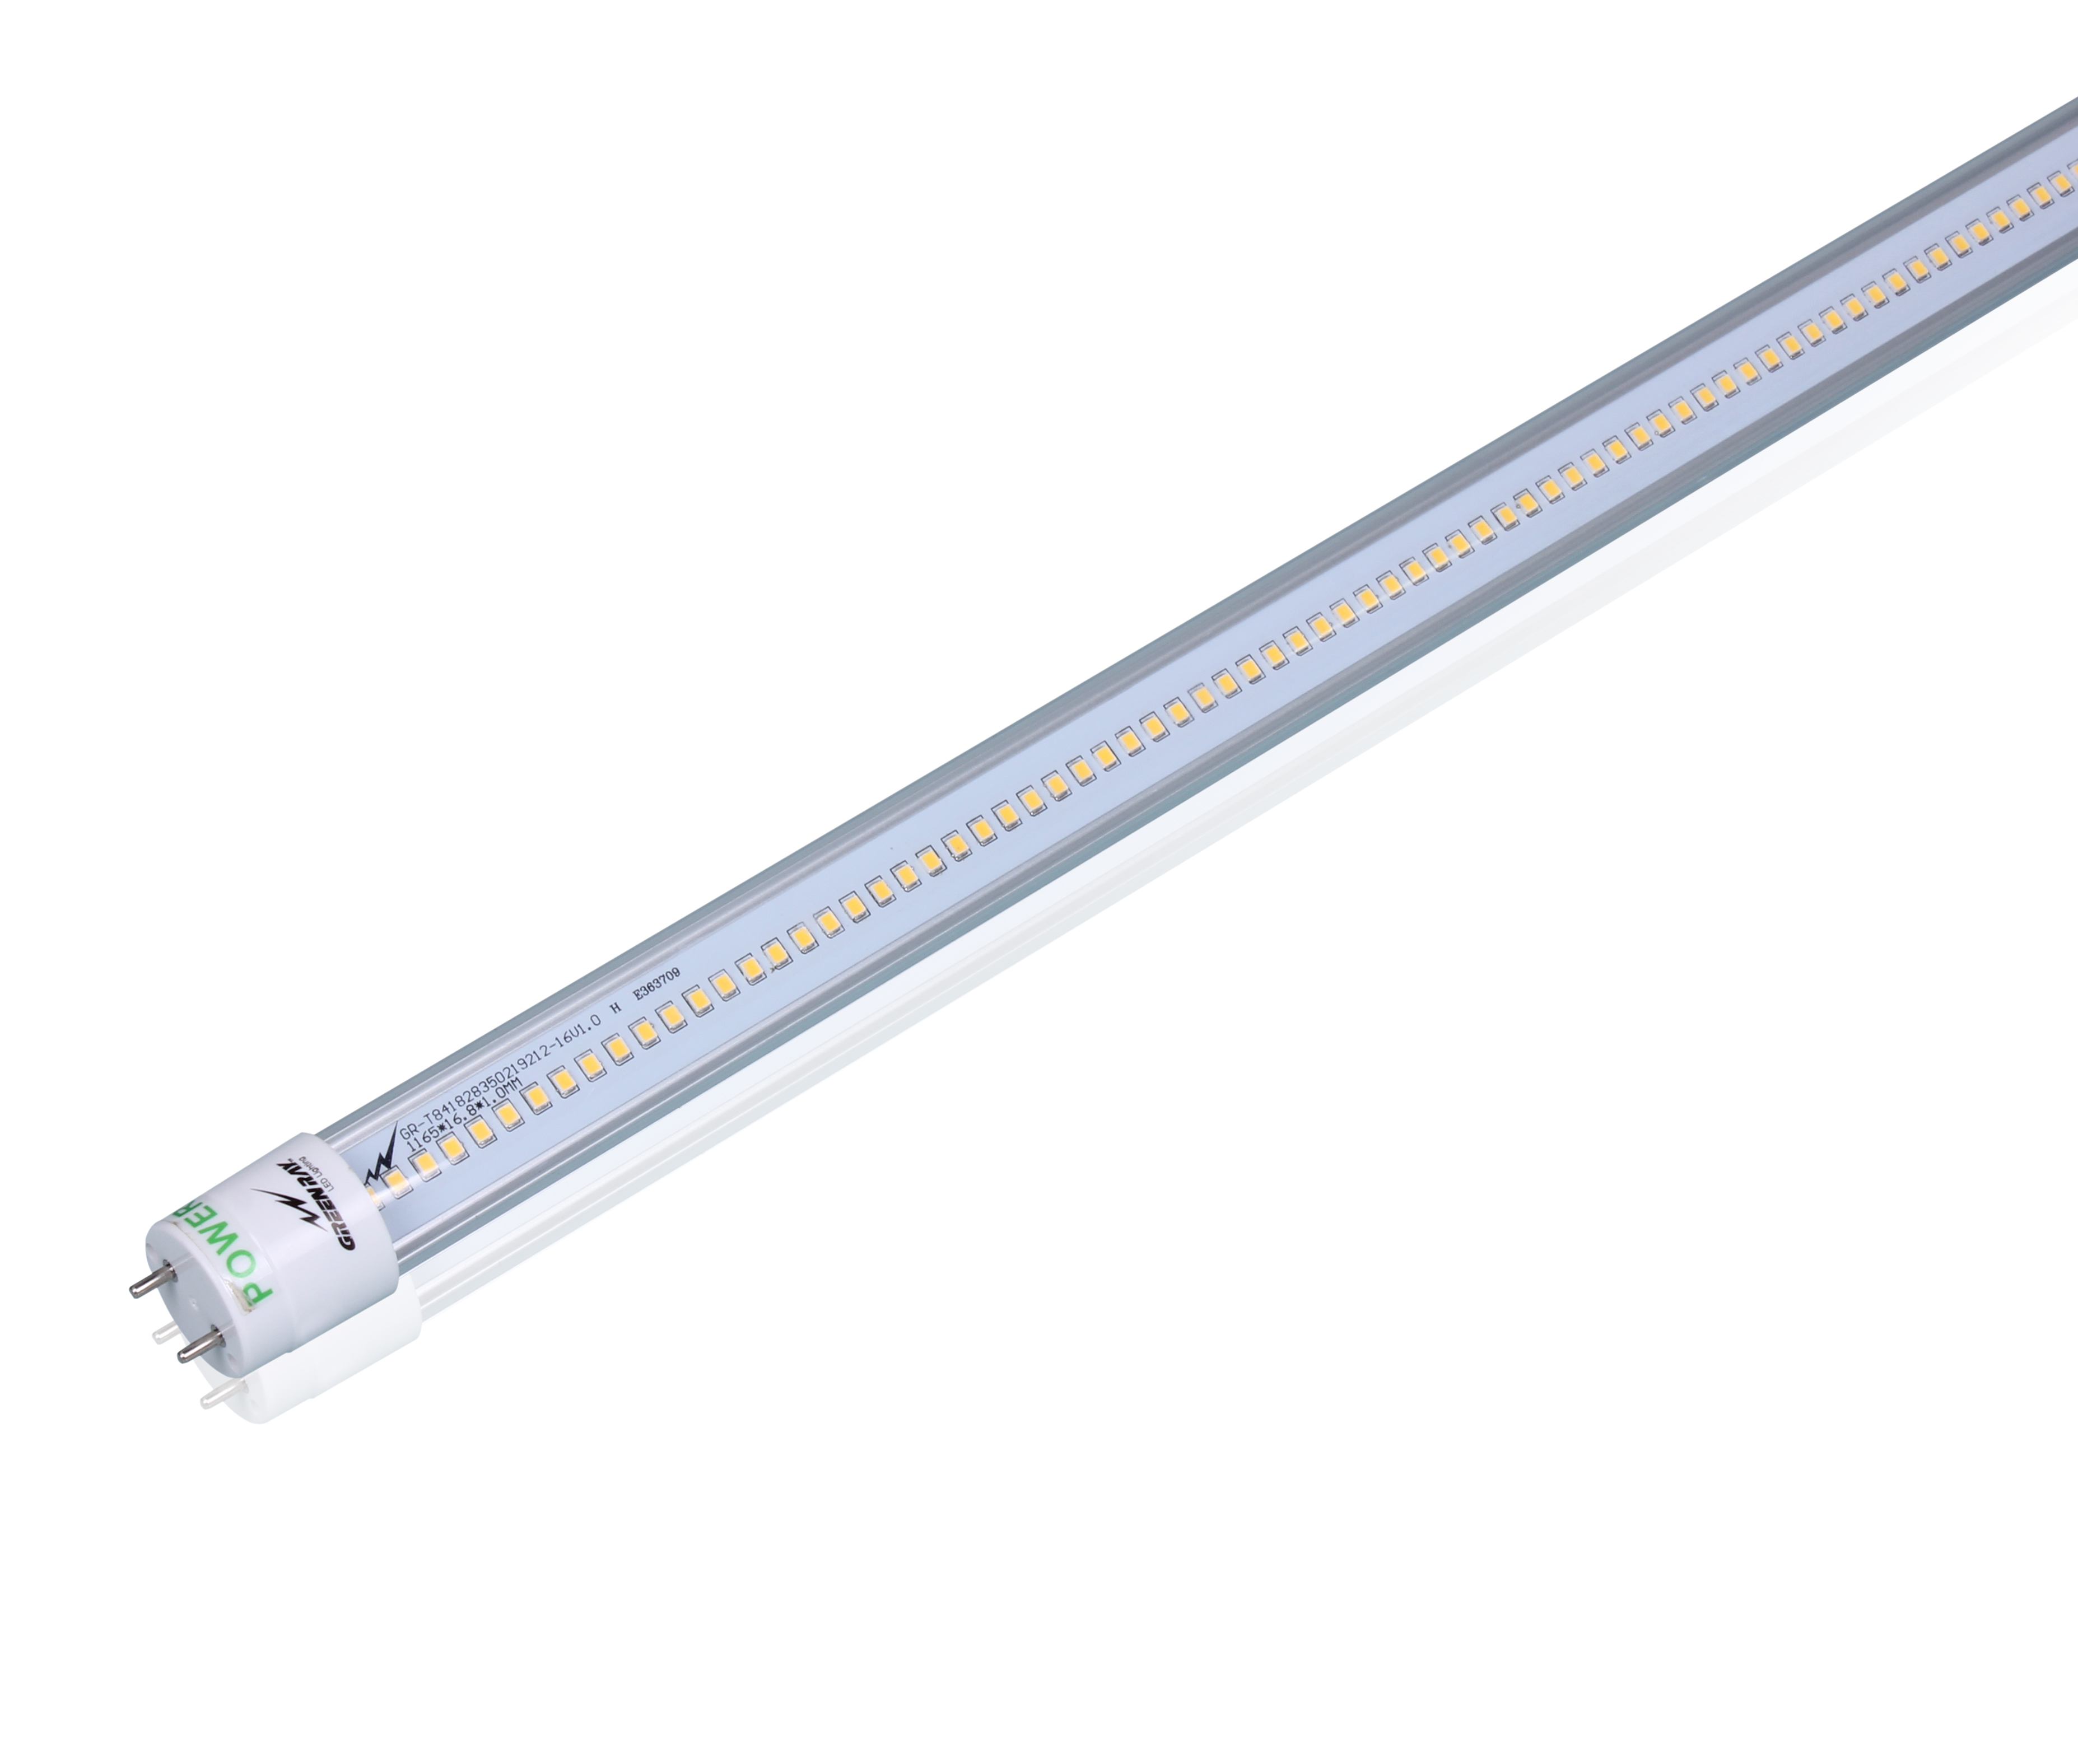 T8 LED tube, 2400mm, 44W, 80Ra 120lm/W, CE\RoHS certificated, 5 years warranty, SMD 2835